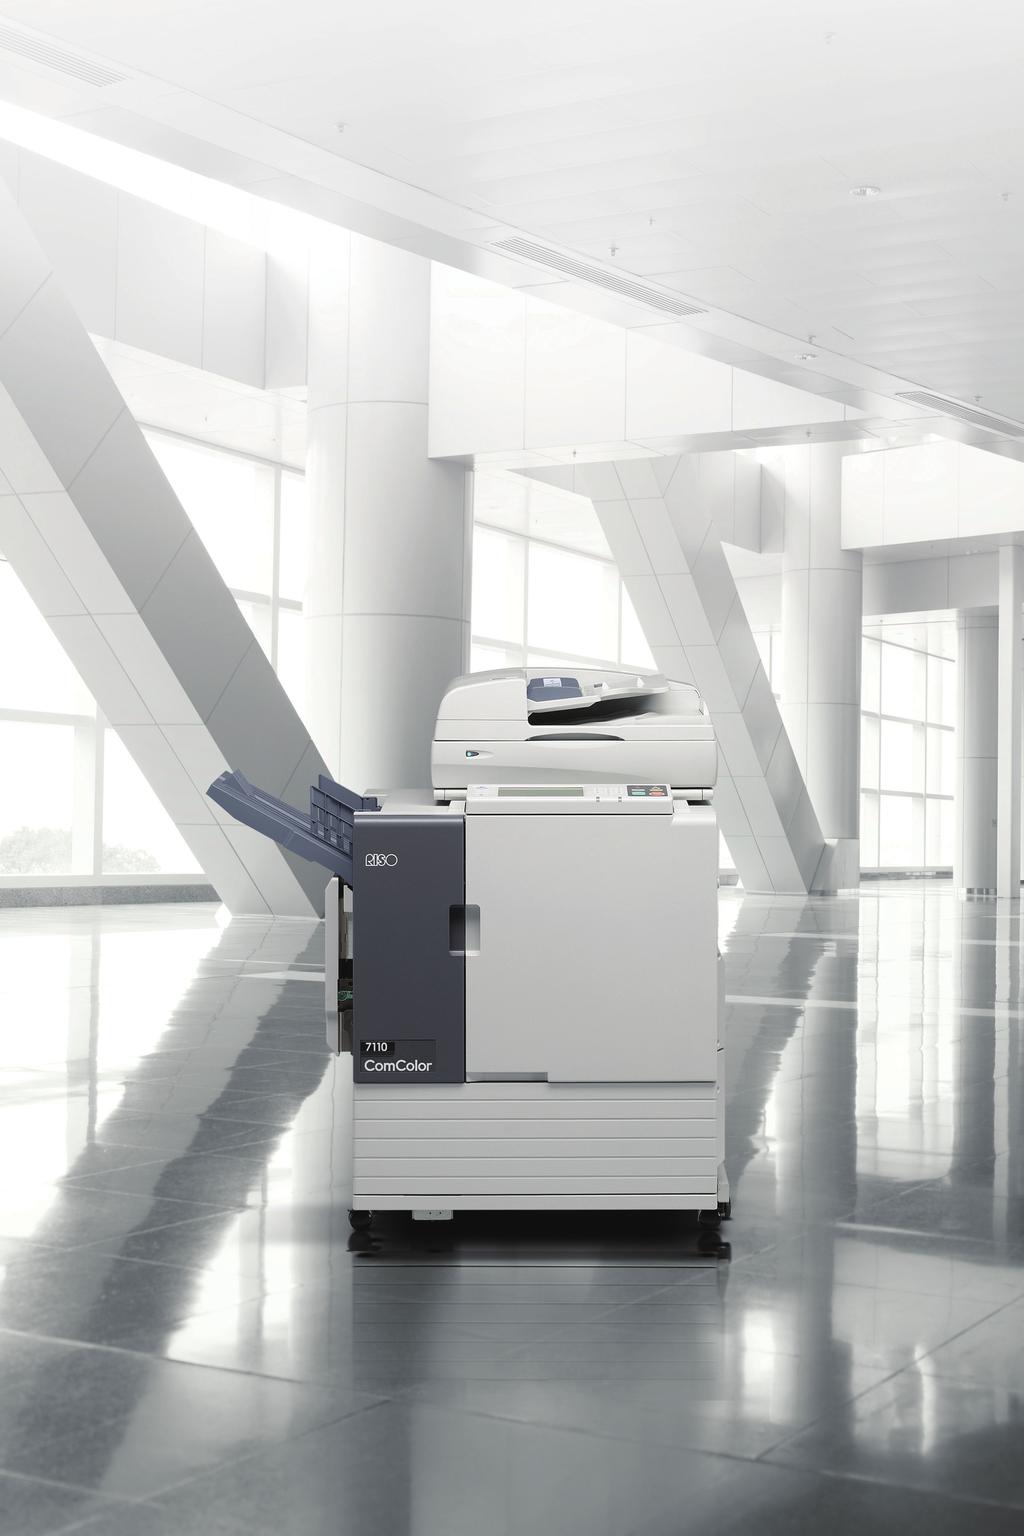 Enhance workflow efficiency Streamline print production The RISO ComColor combines powerful, high-speed performance with low